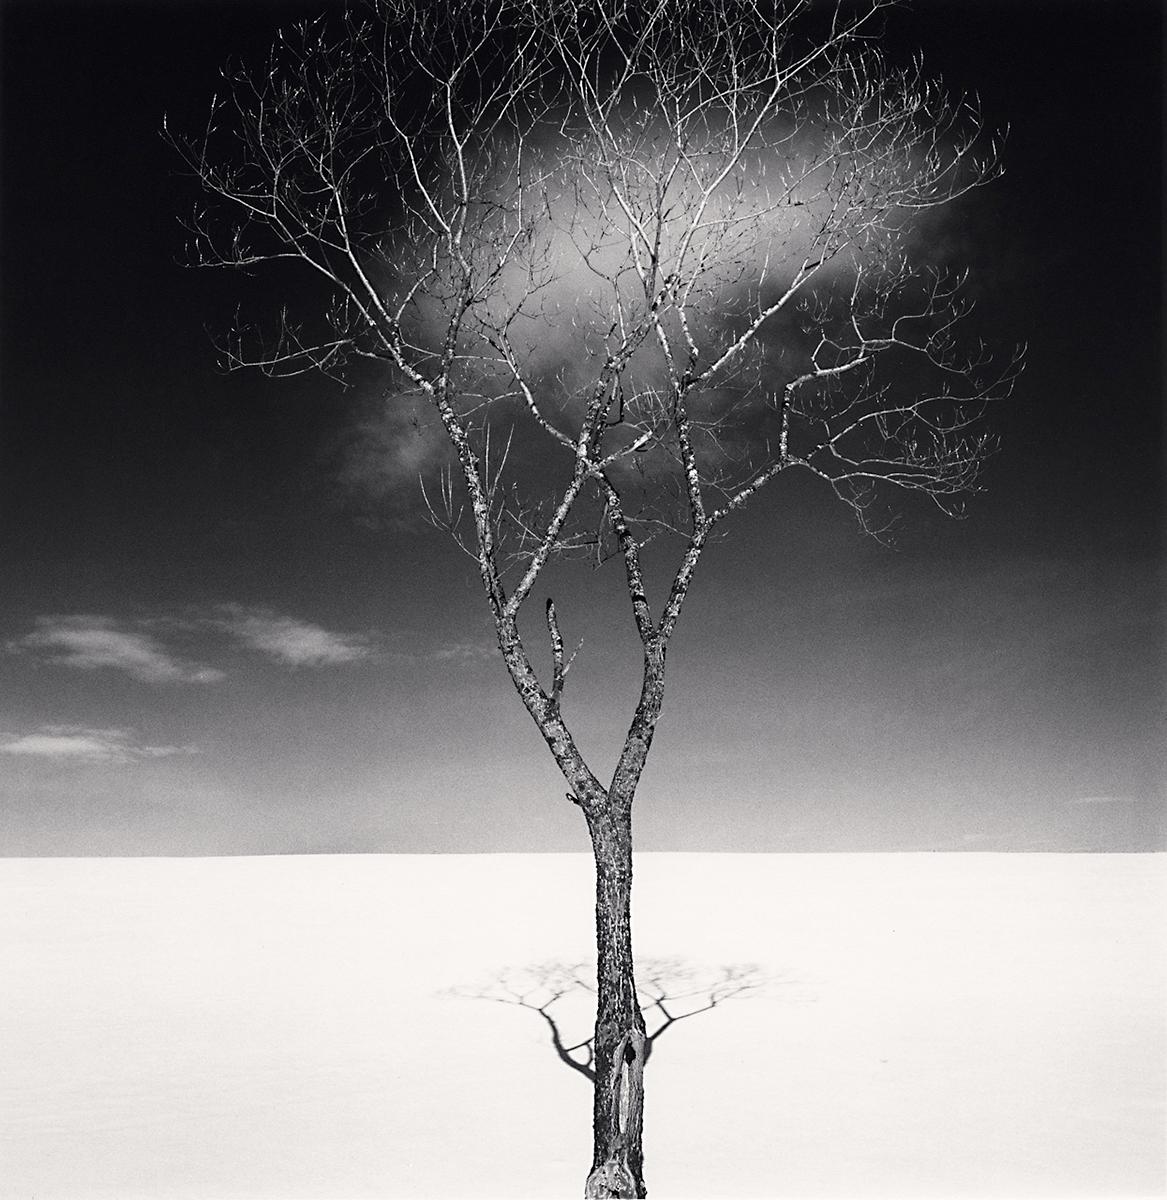 Onishi Tree Shadow and Clouds, Study 2, Hokkaido, Japan by Michael Kenna is a 8 x 8 inch* silver gelatin print, available in an edition of 25.
*Please note: the measurements of this print are approximated
This photograph is signed, titled, negative